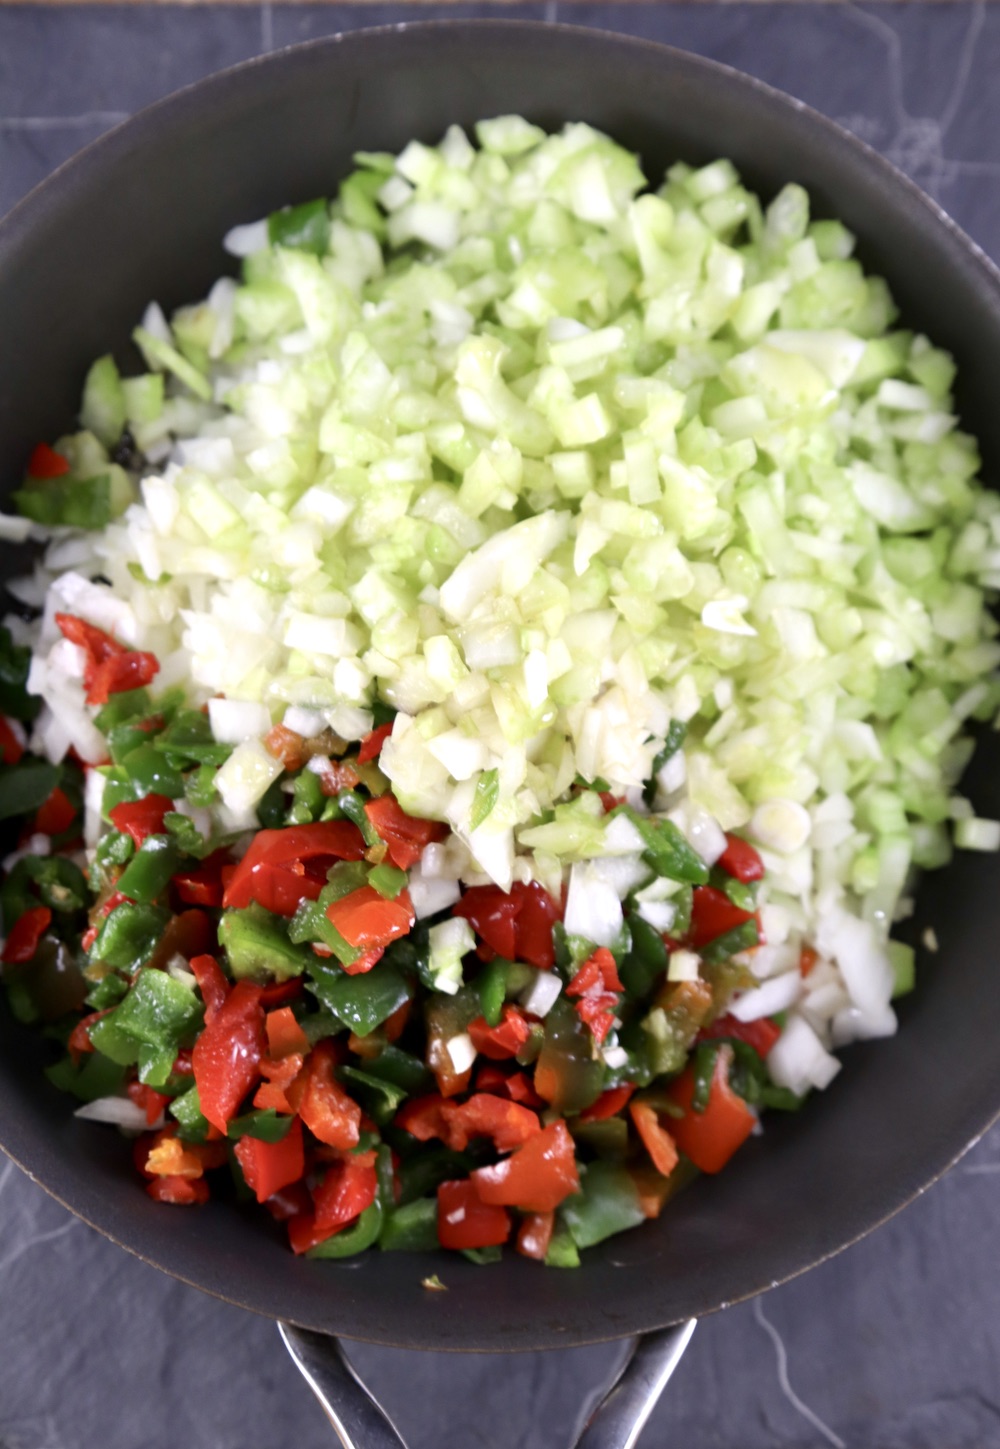 Celery, onions and bell peppers chopped in a skillet